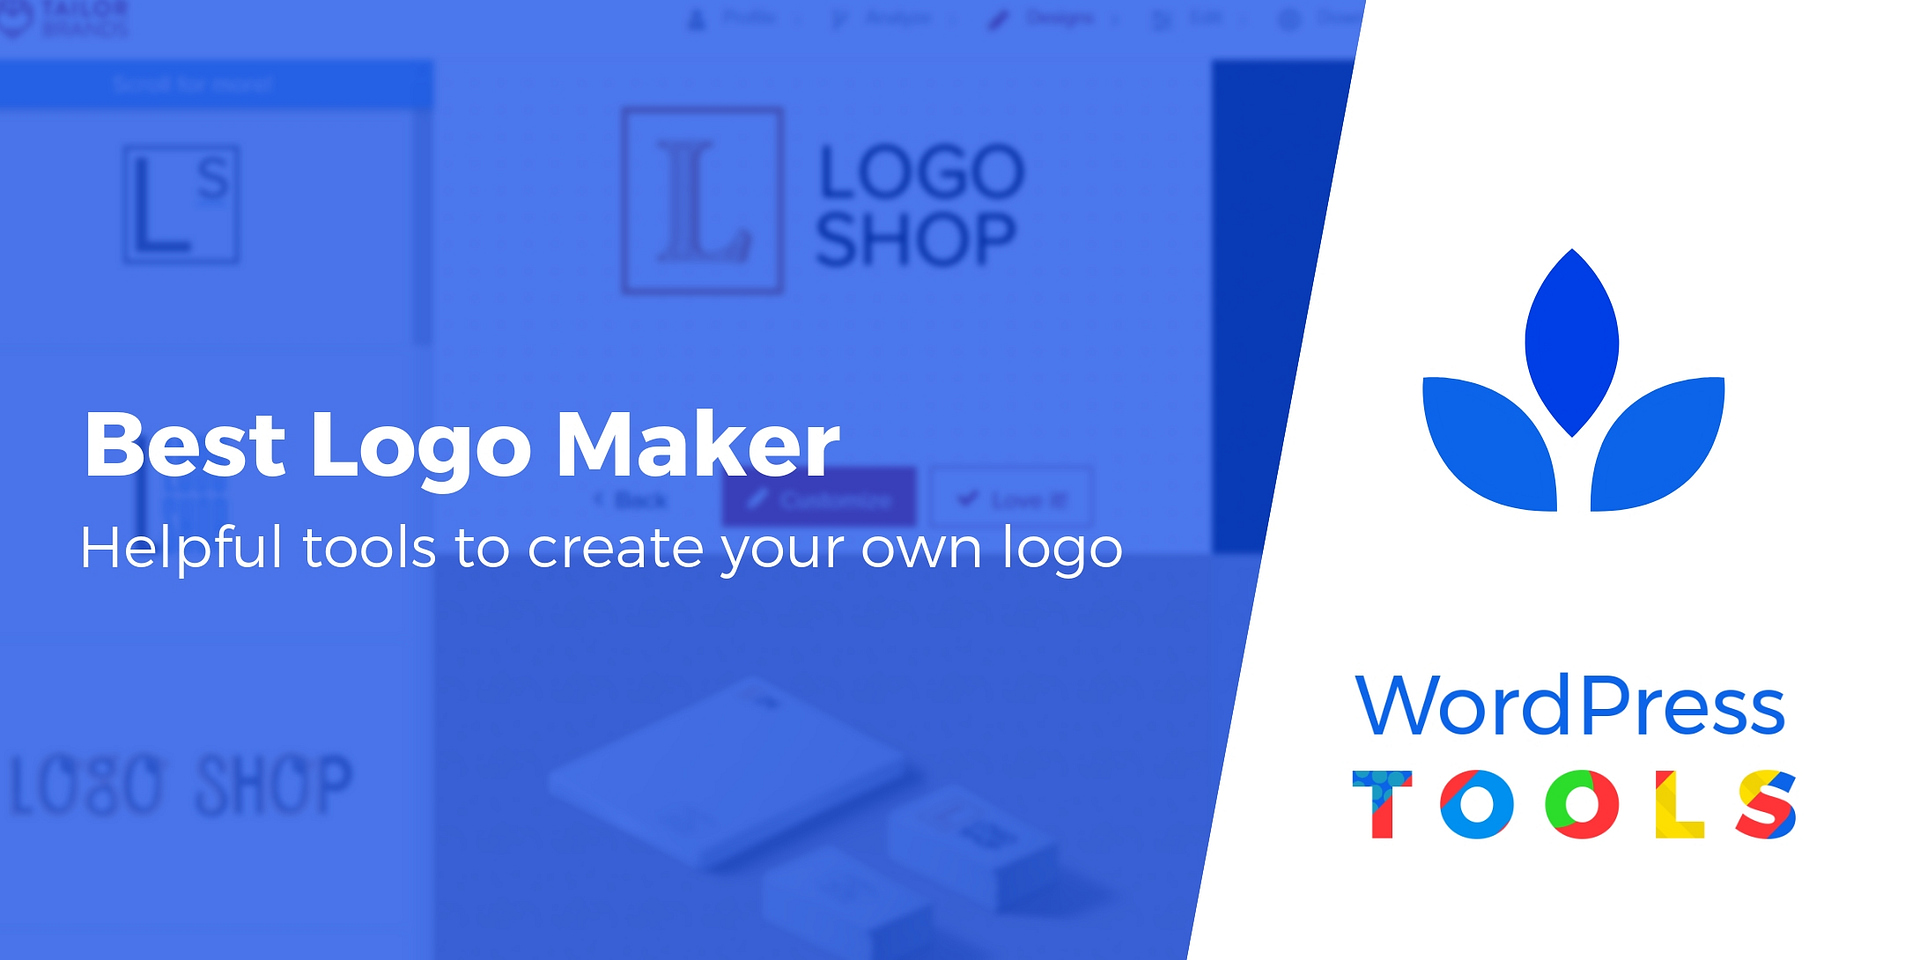 Best Logo Maker 10 Great Tools Compared For 2020 - 15 face roblox png for free download on premium art themes